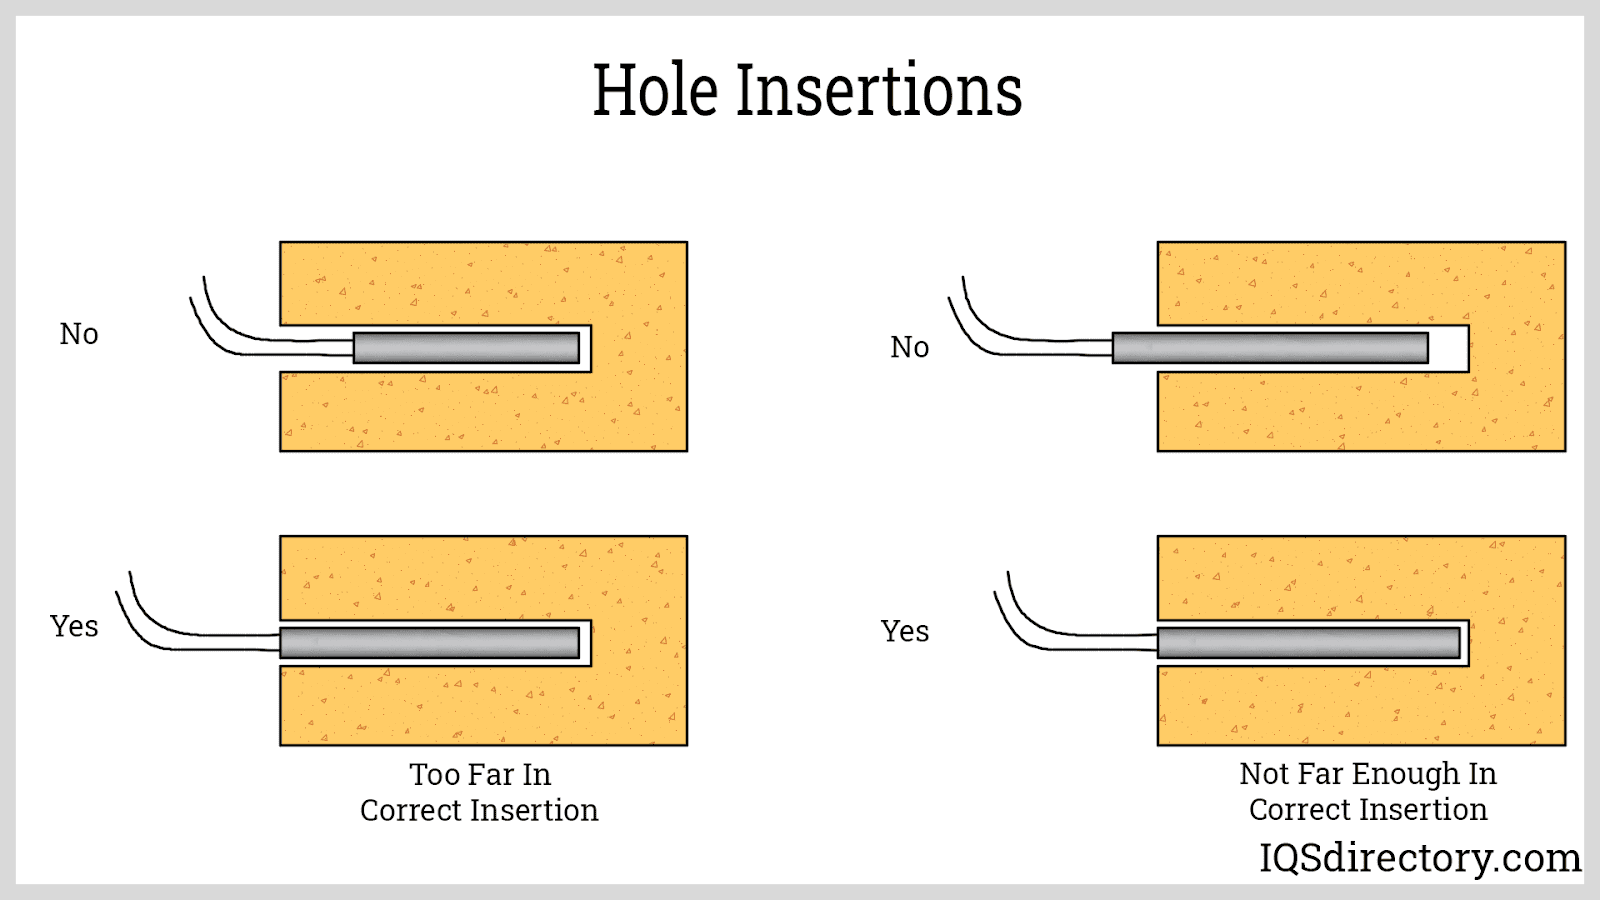 Hole Insertions